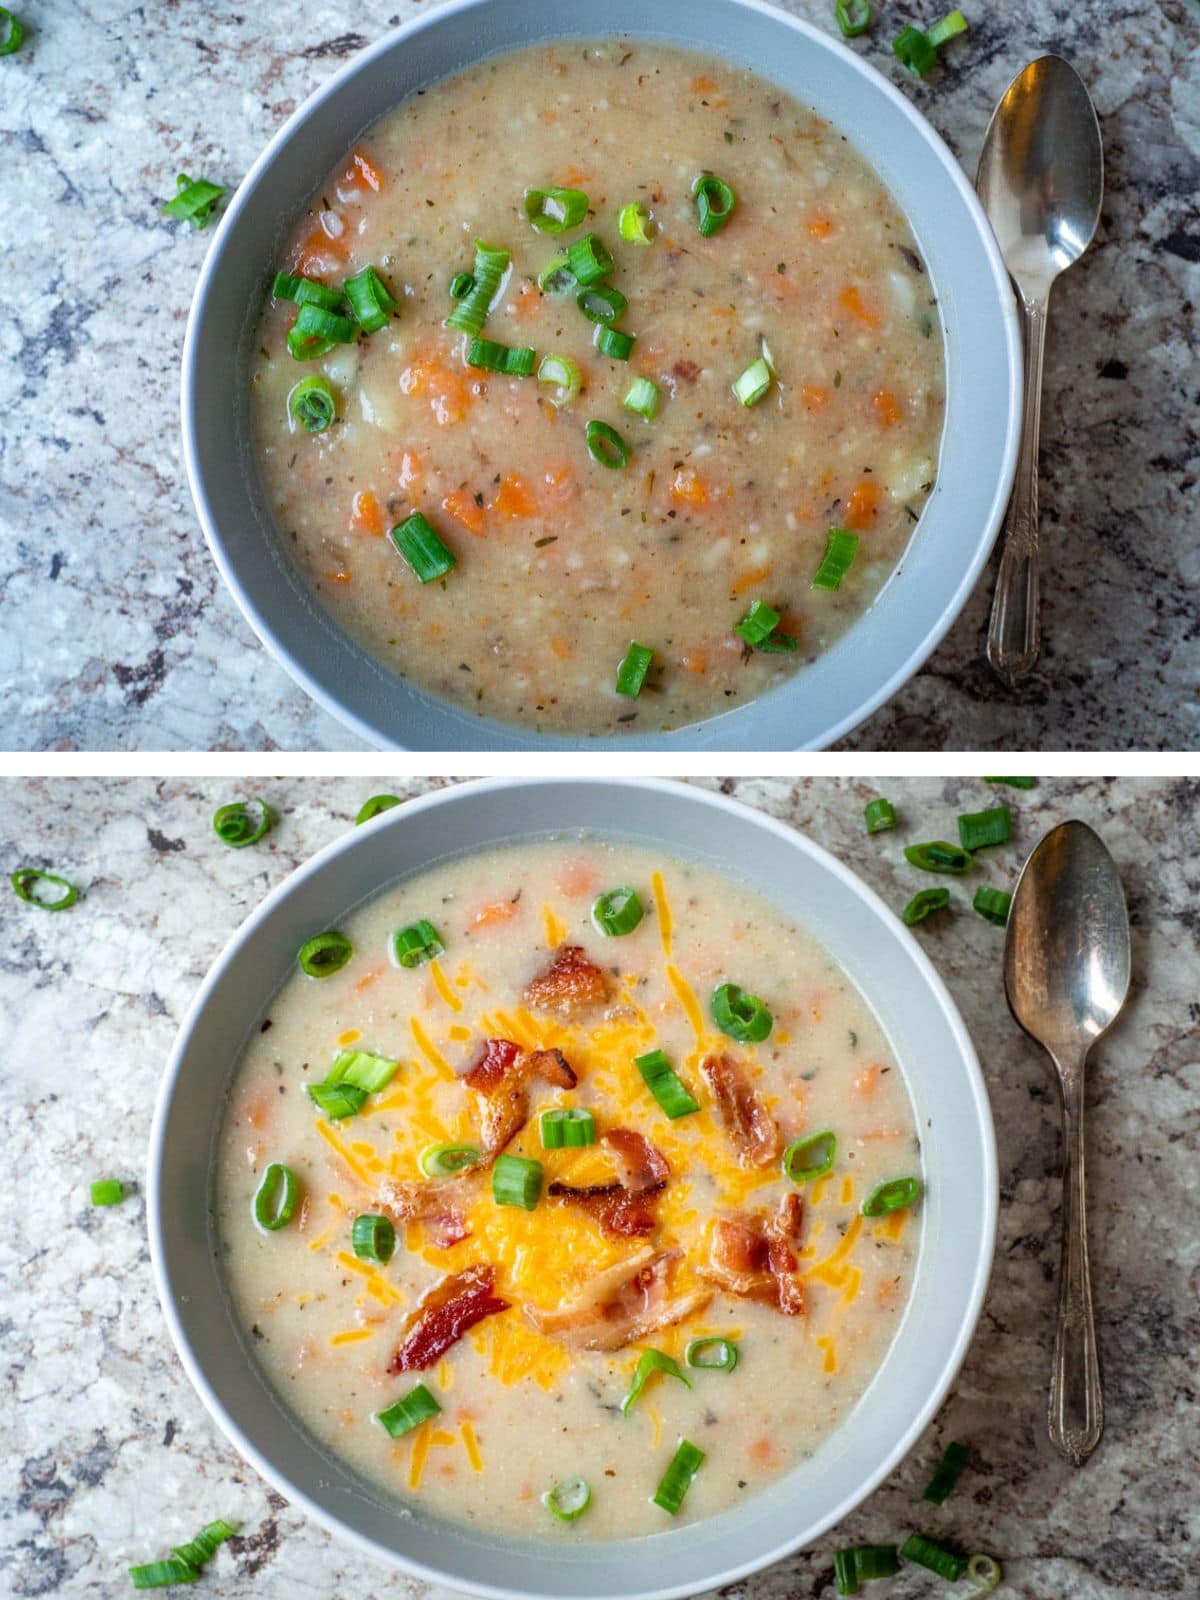 Comparison of a bowl of potato soup with milk added and without.